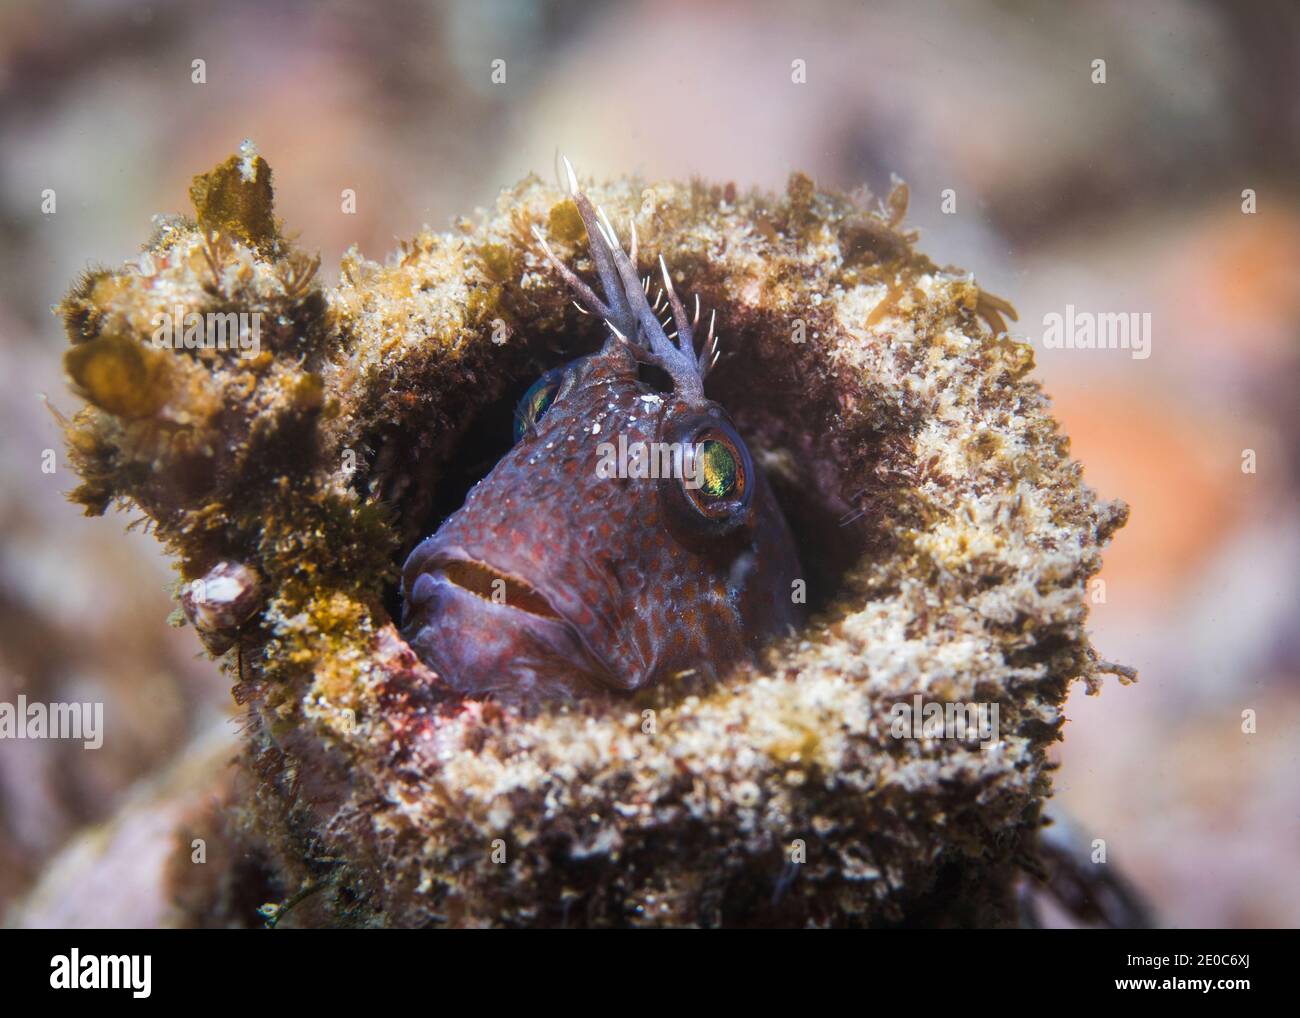 Small Horned blenny fish (Parablennius cornutus) peeking it's head out of an old bottle on the reef Stock Photo